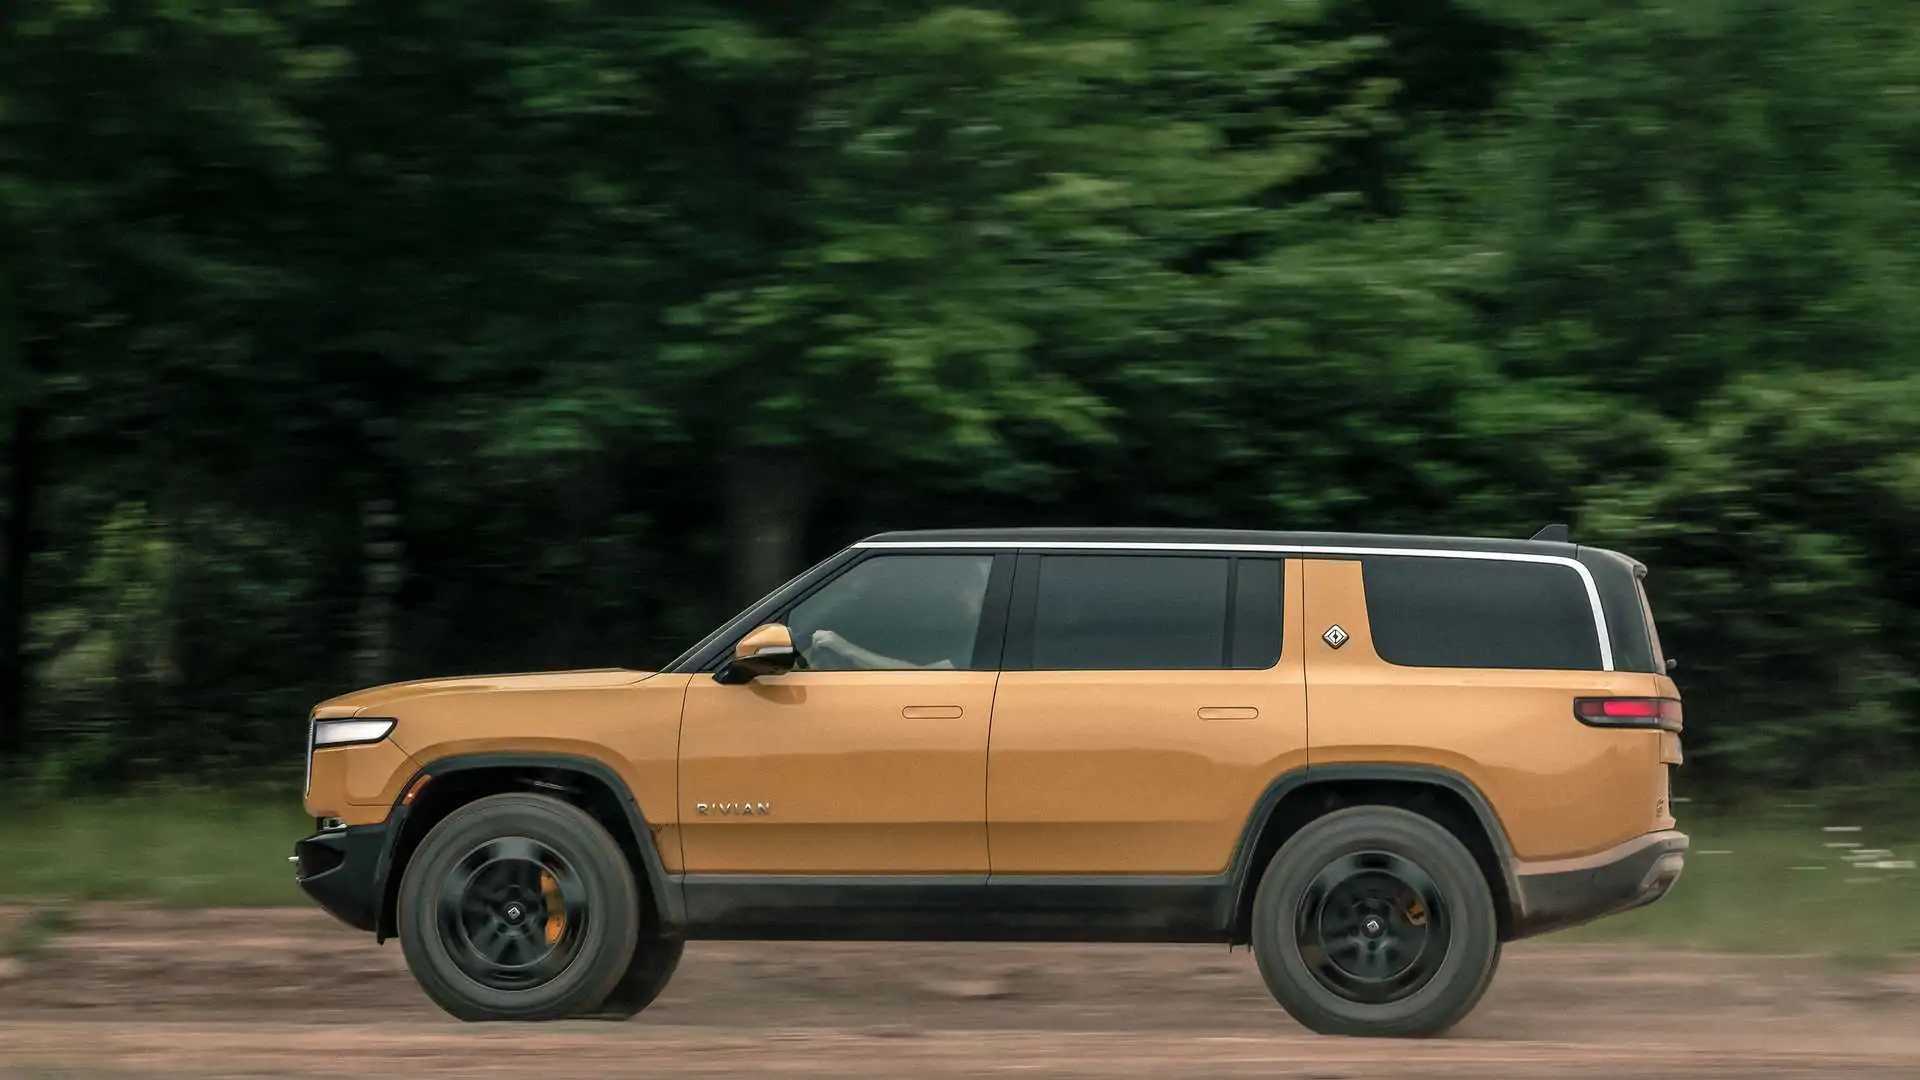 rivian raises production goal again after strong q3 results